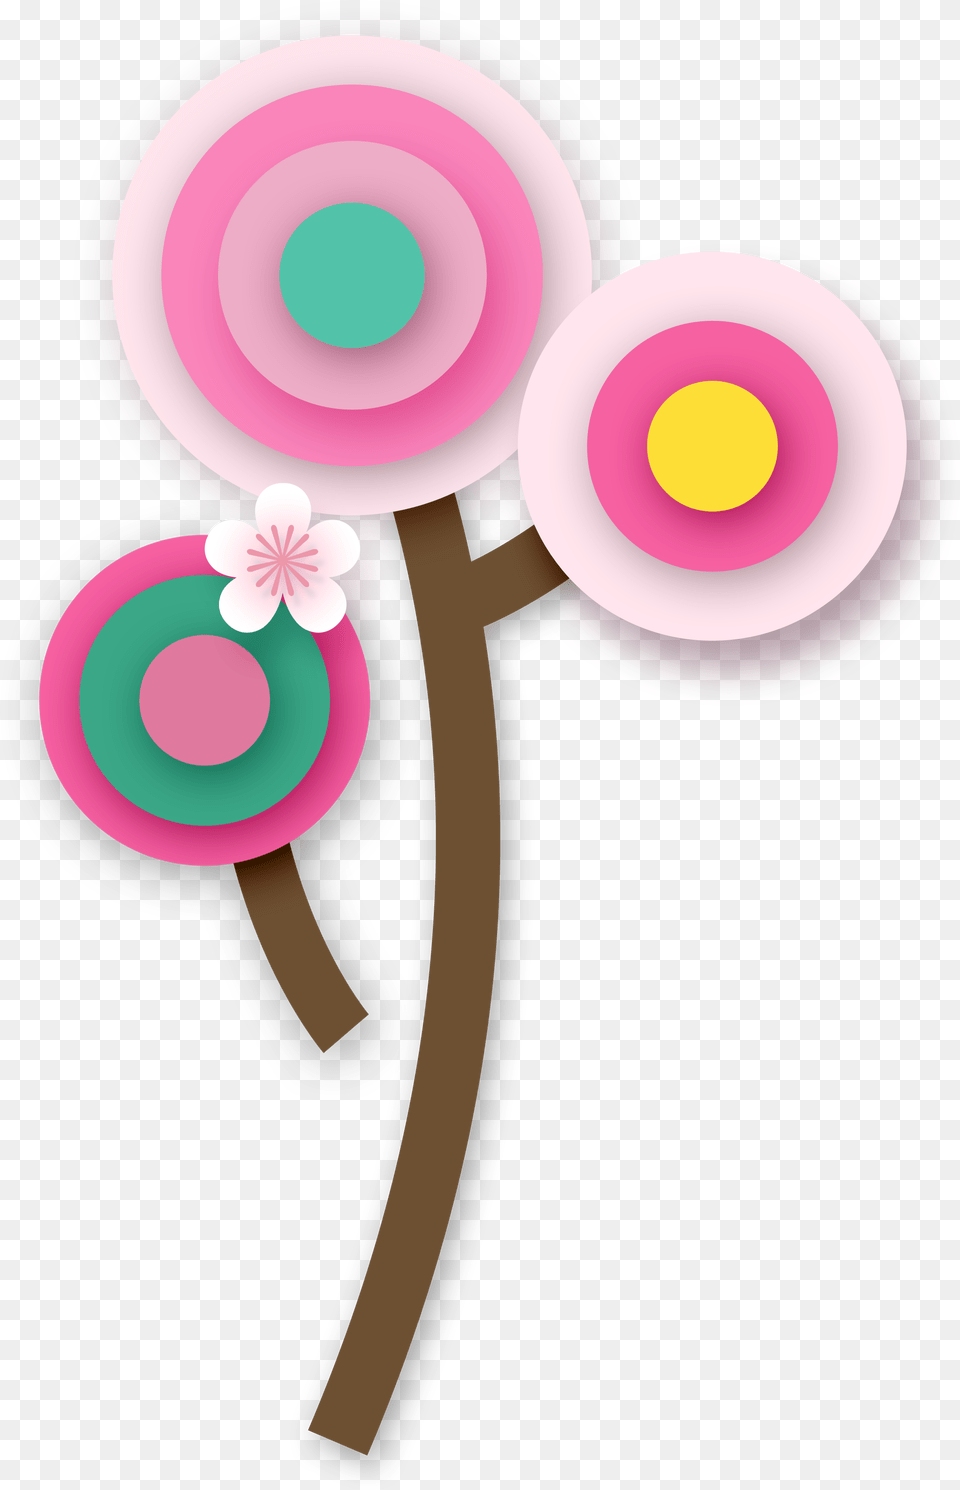 Hand Painted Cartoon Flat Flower Decoration Vector Clip Art, Candy, Food, Sweets, Cross Free Png